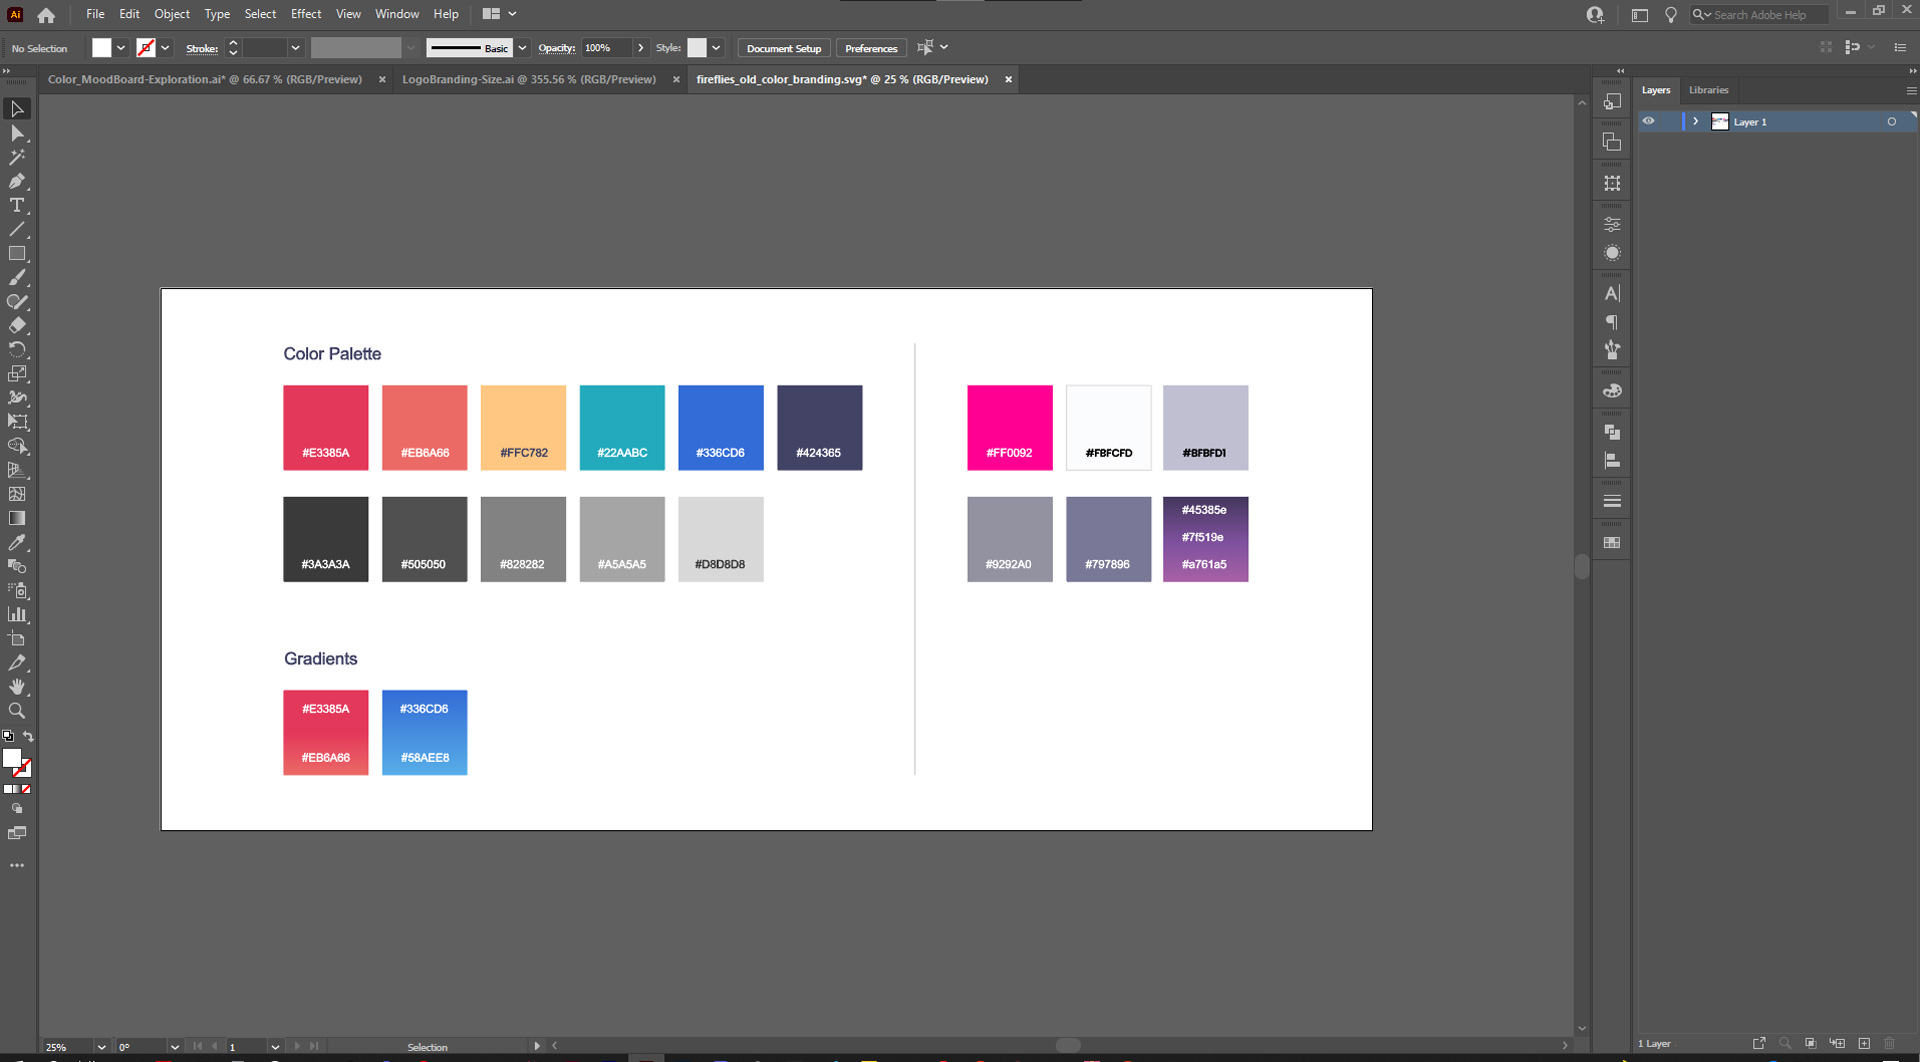 Finalization based on the previous moodboard color palette exploration.